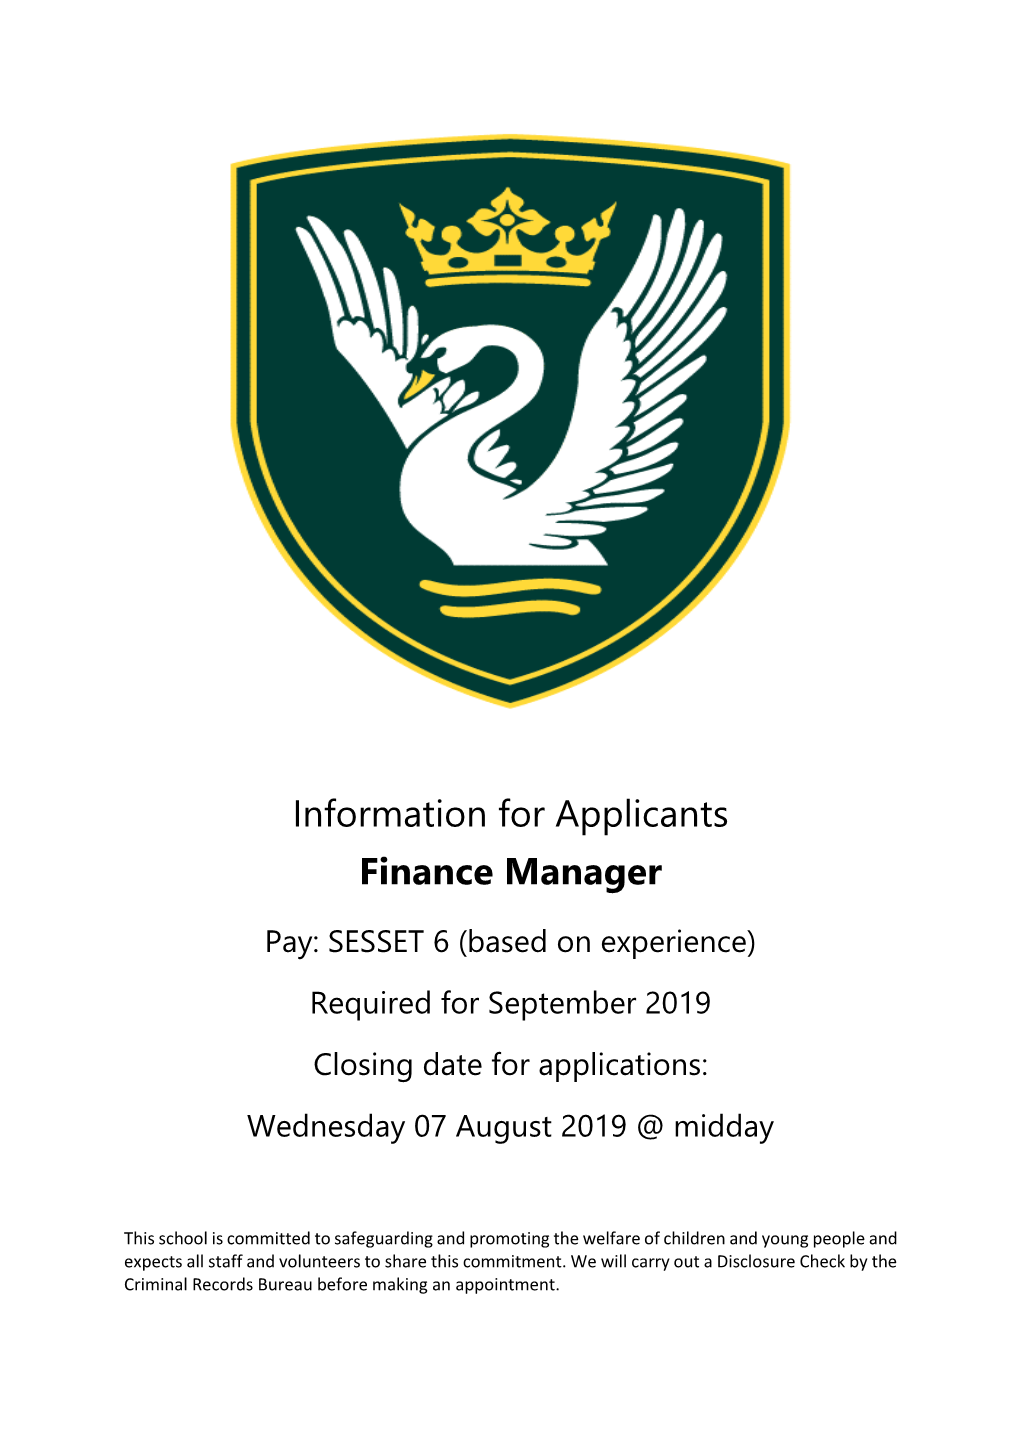 Information for Applicants Finance Manager